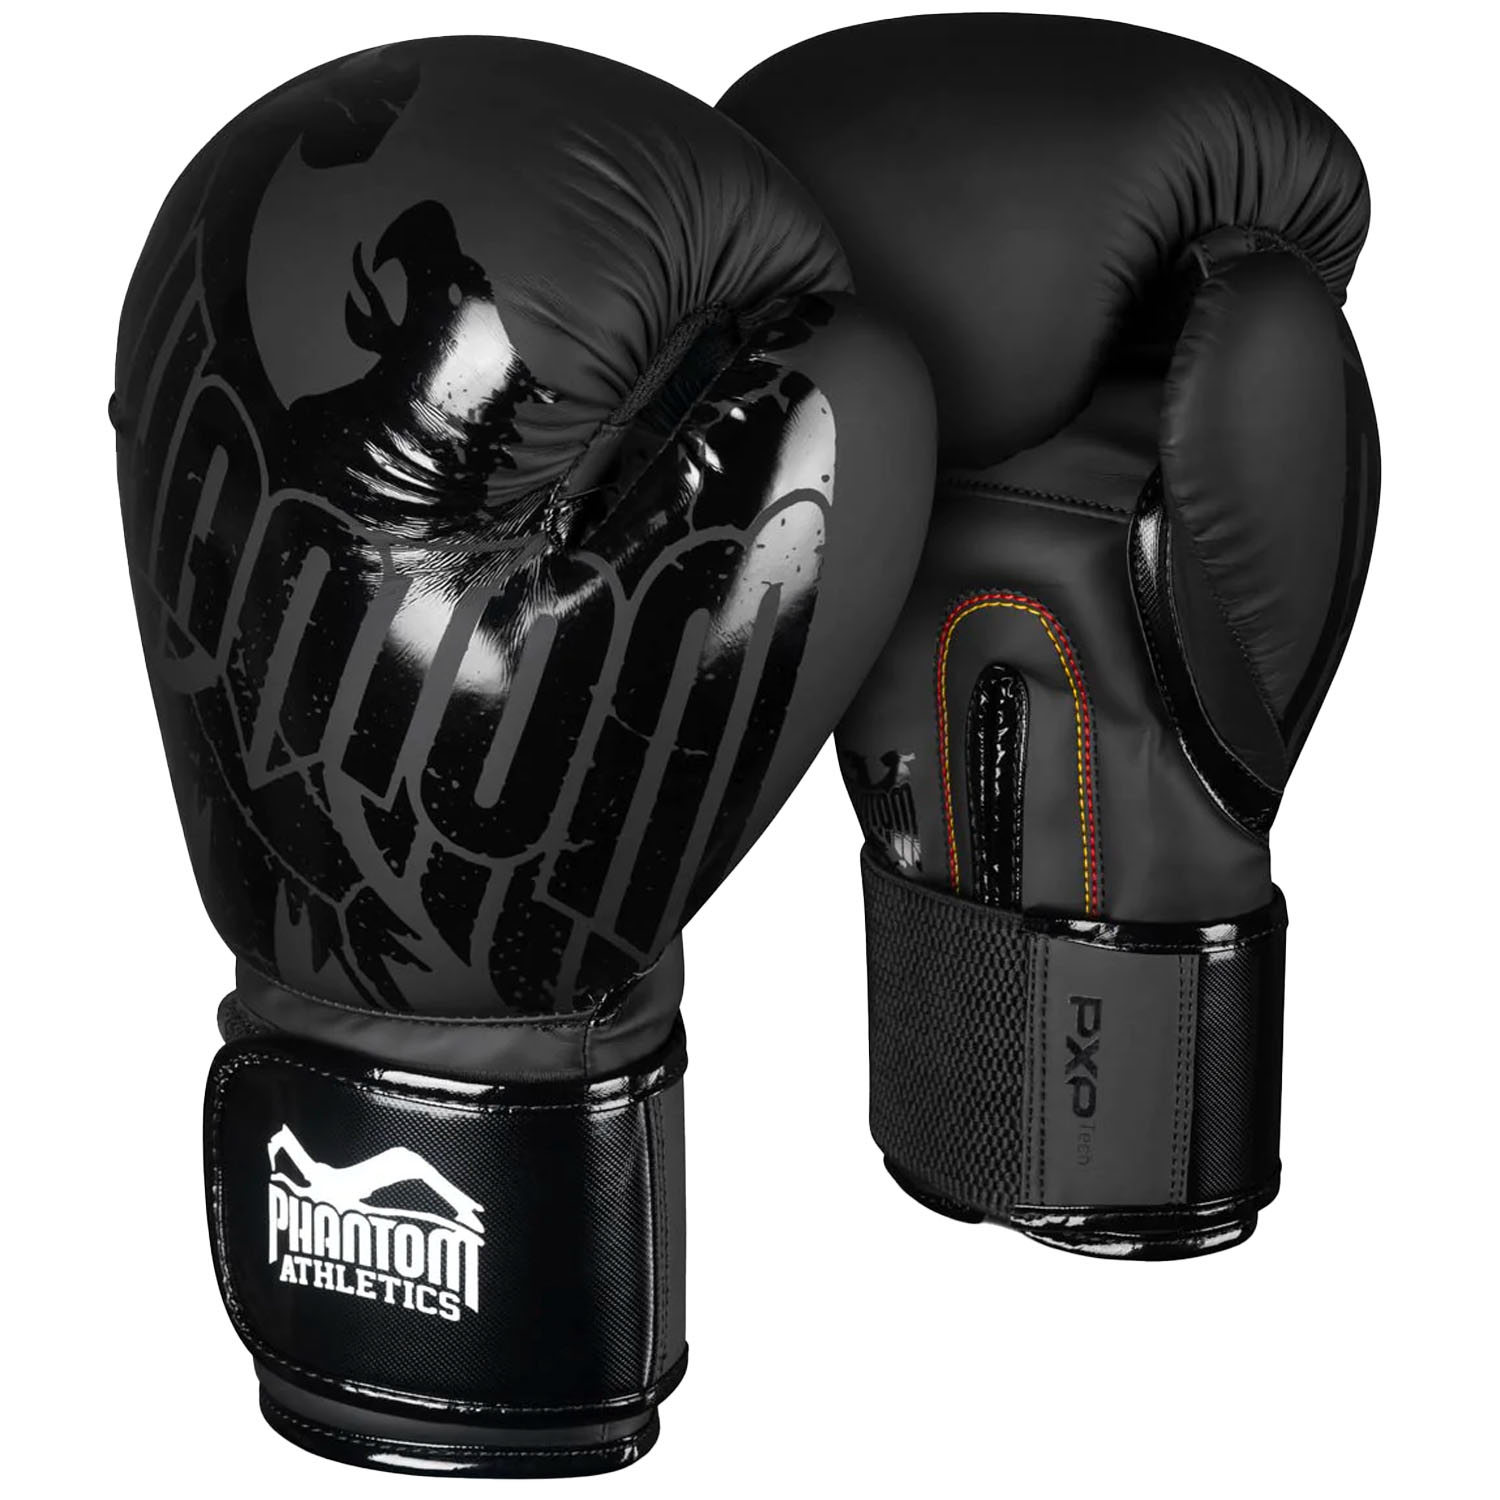 Boxing Gloves with low price - perfect for beginners and with